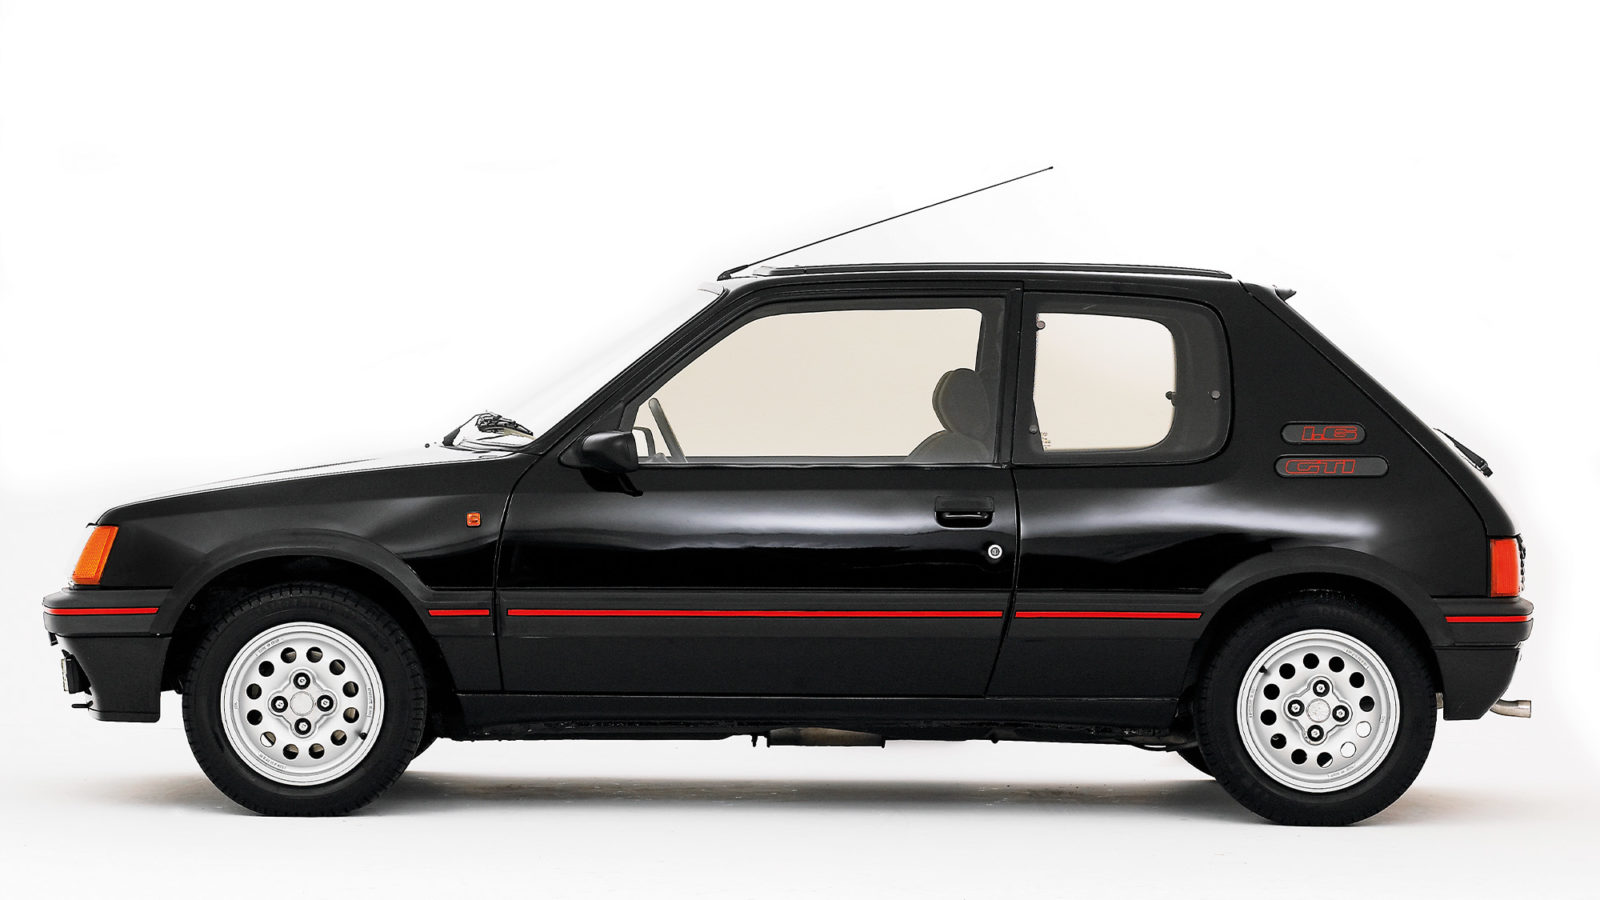 Side view of Peugeot 205 GTI